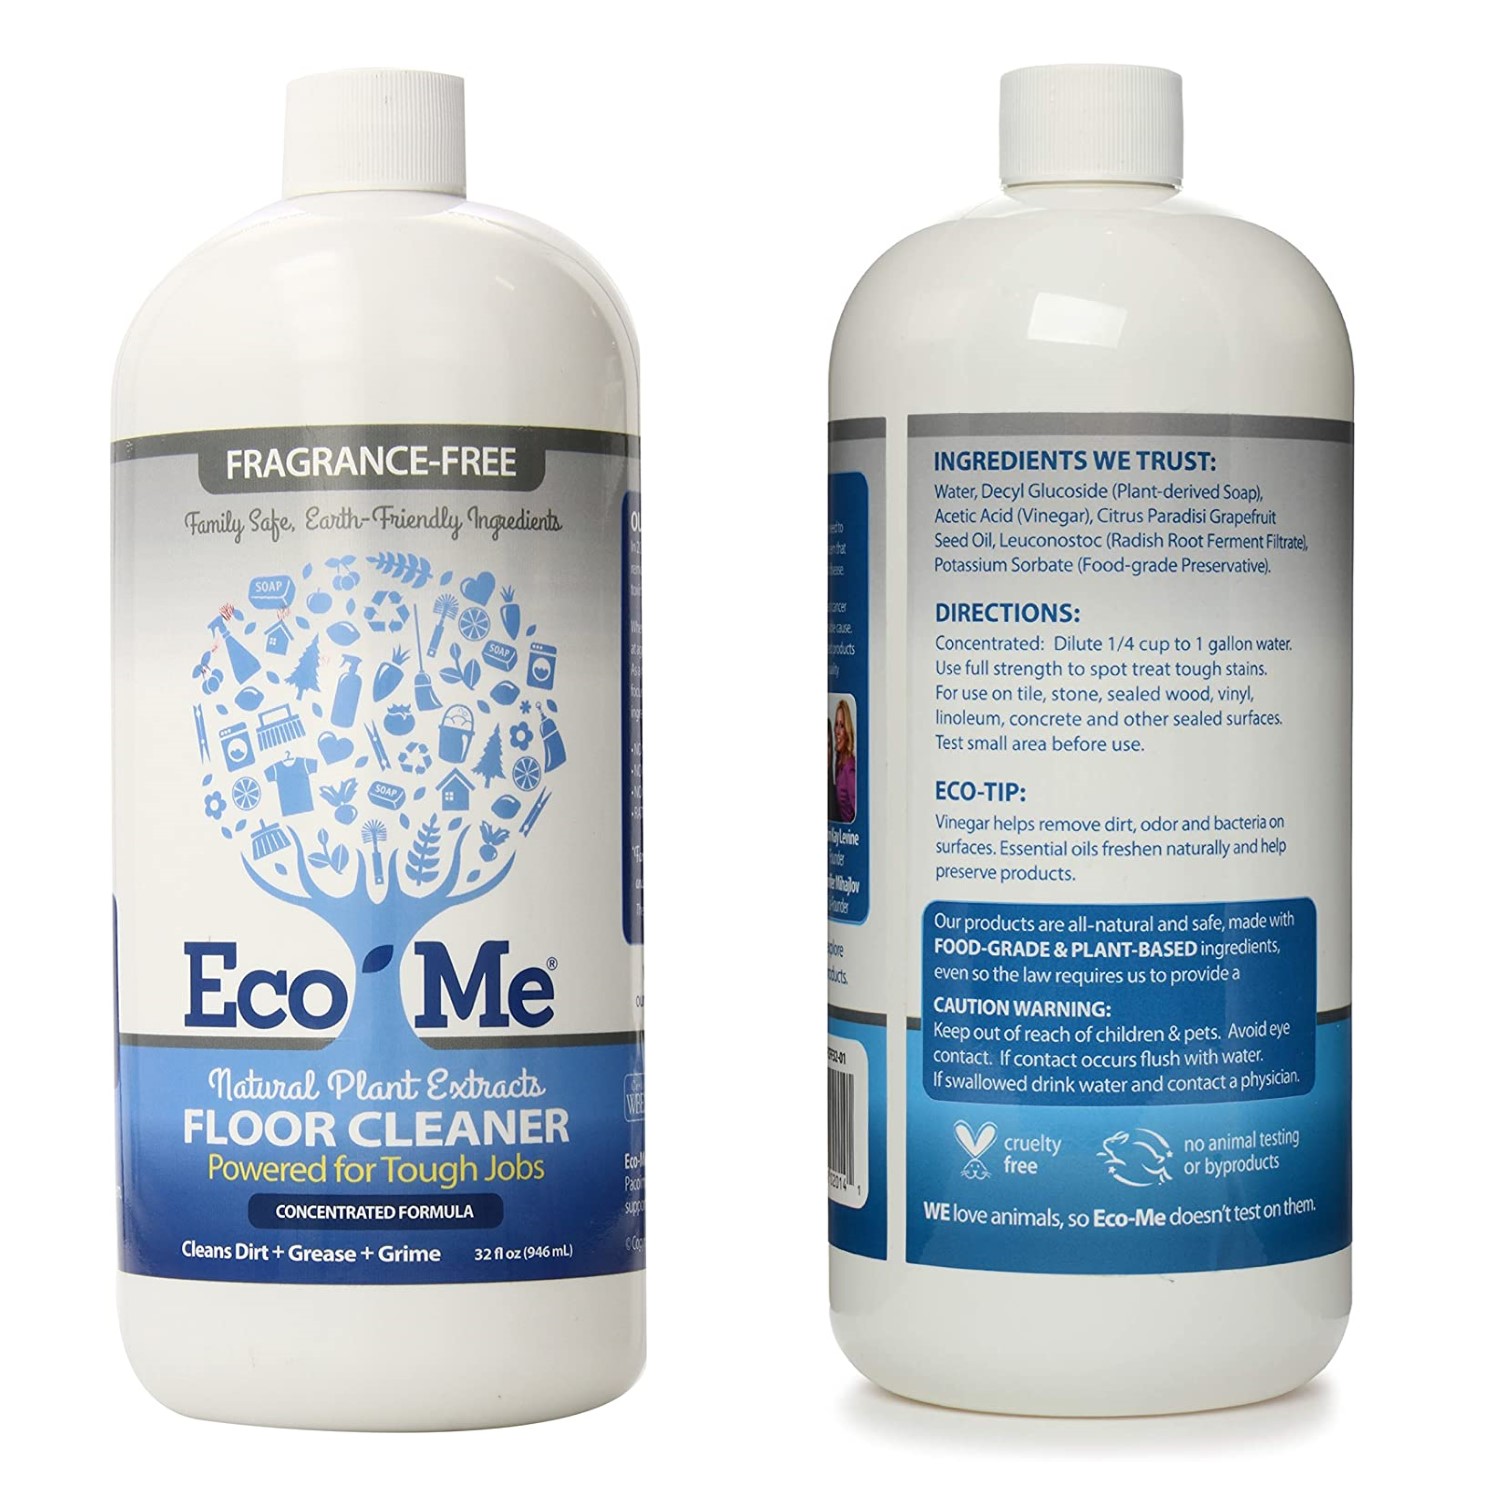 Image of white bottle containing eco-friendly cleaning product from Eco-Me; front and back labels showing